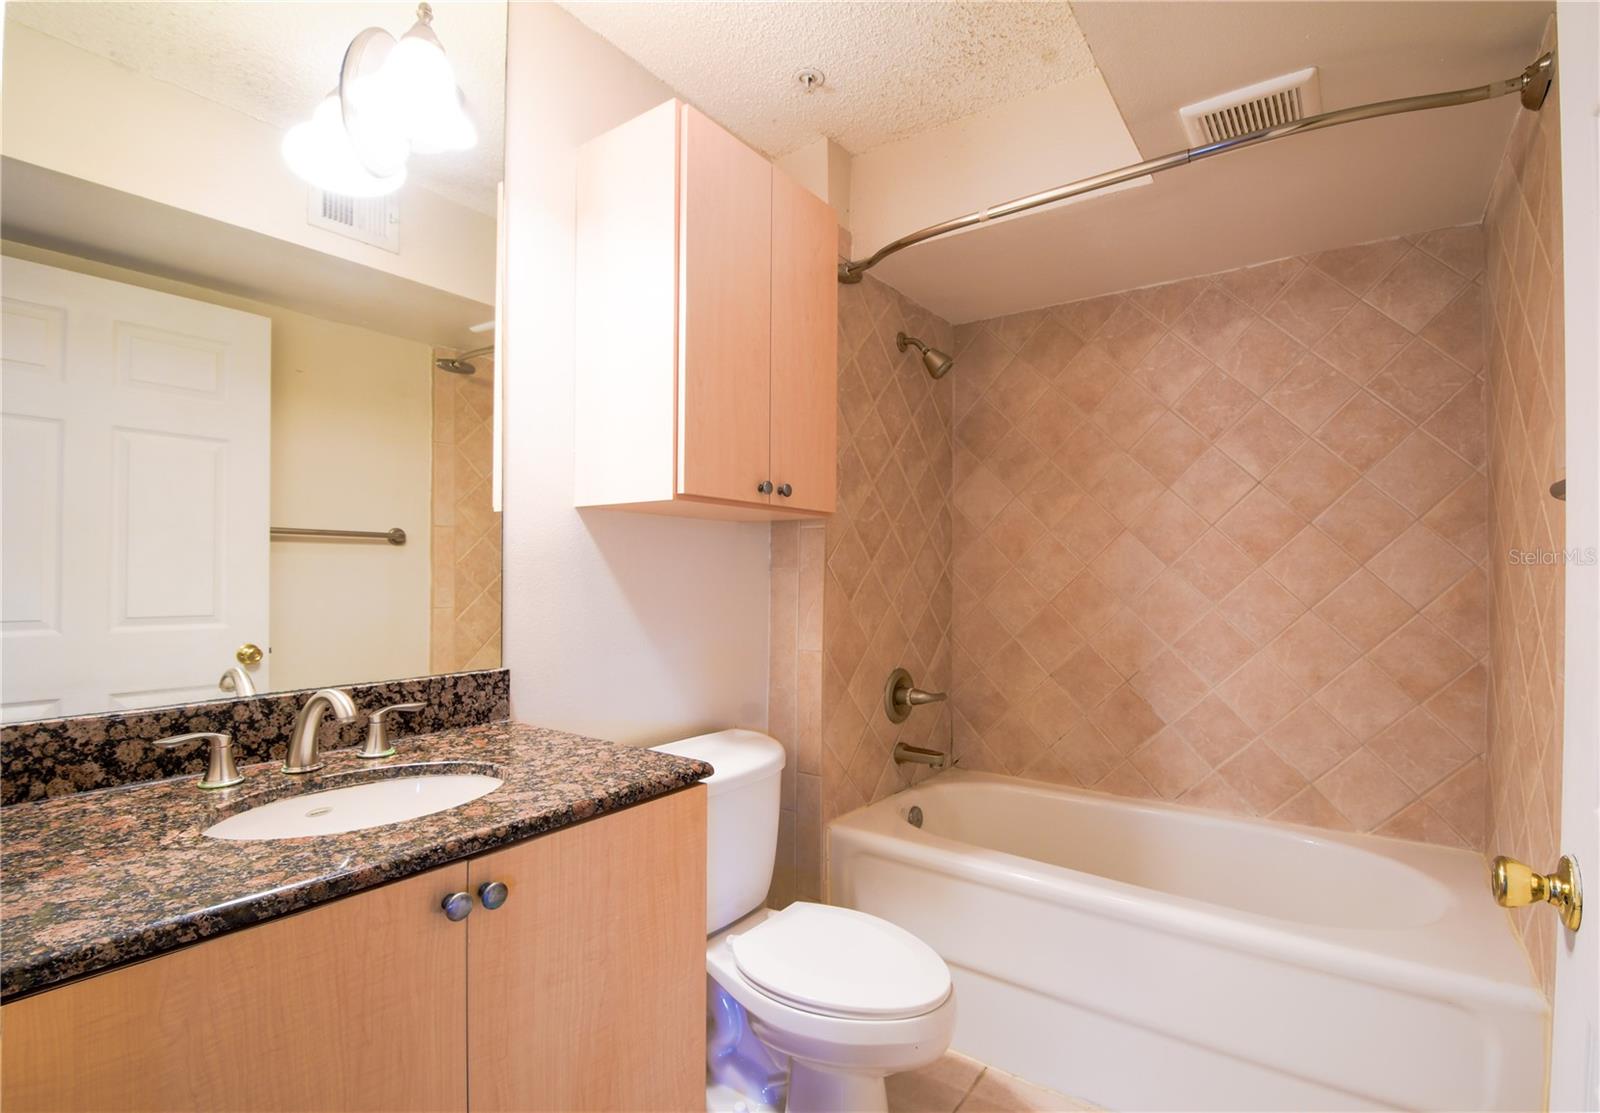 Bathroom 2 features ceramic tile, a mirrored vanity with storage, granite countertop, and tub with shower.